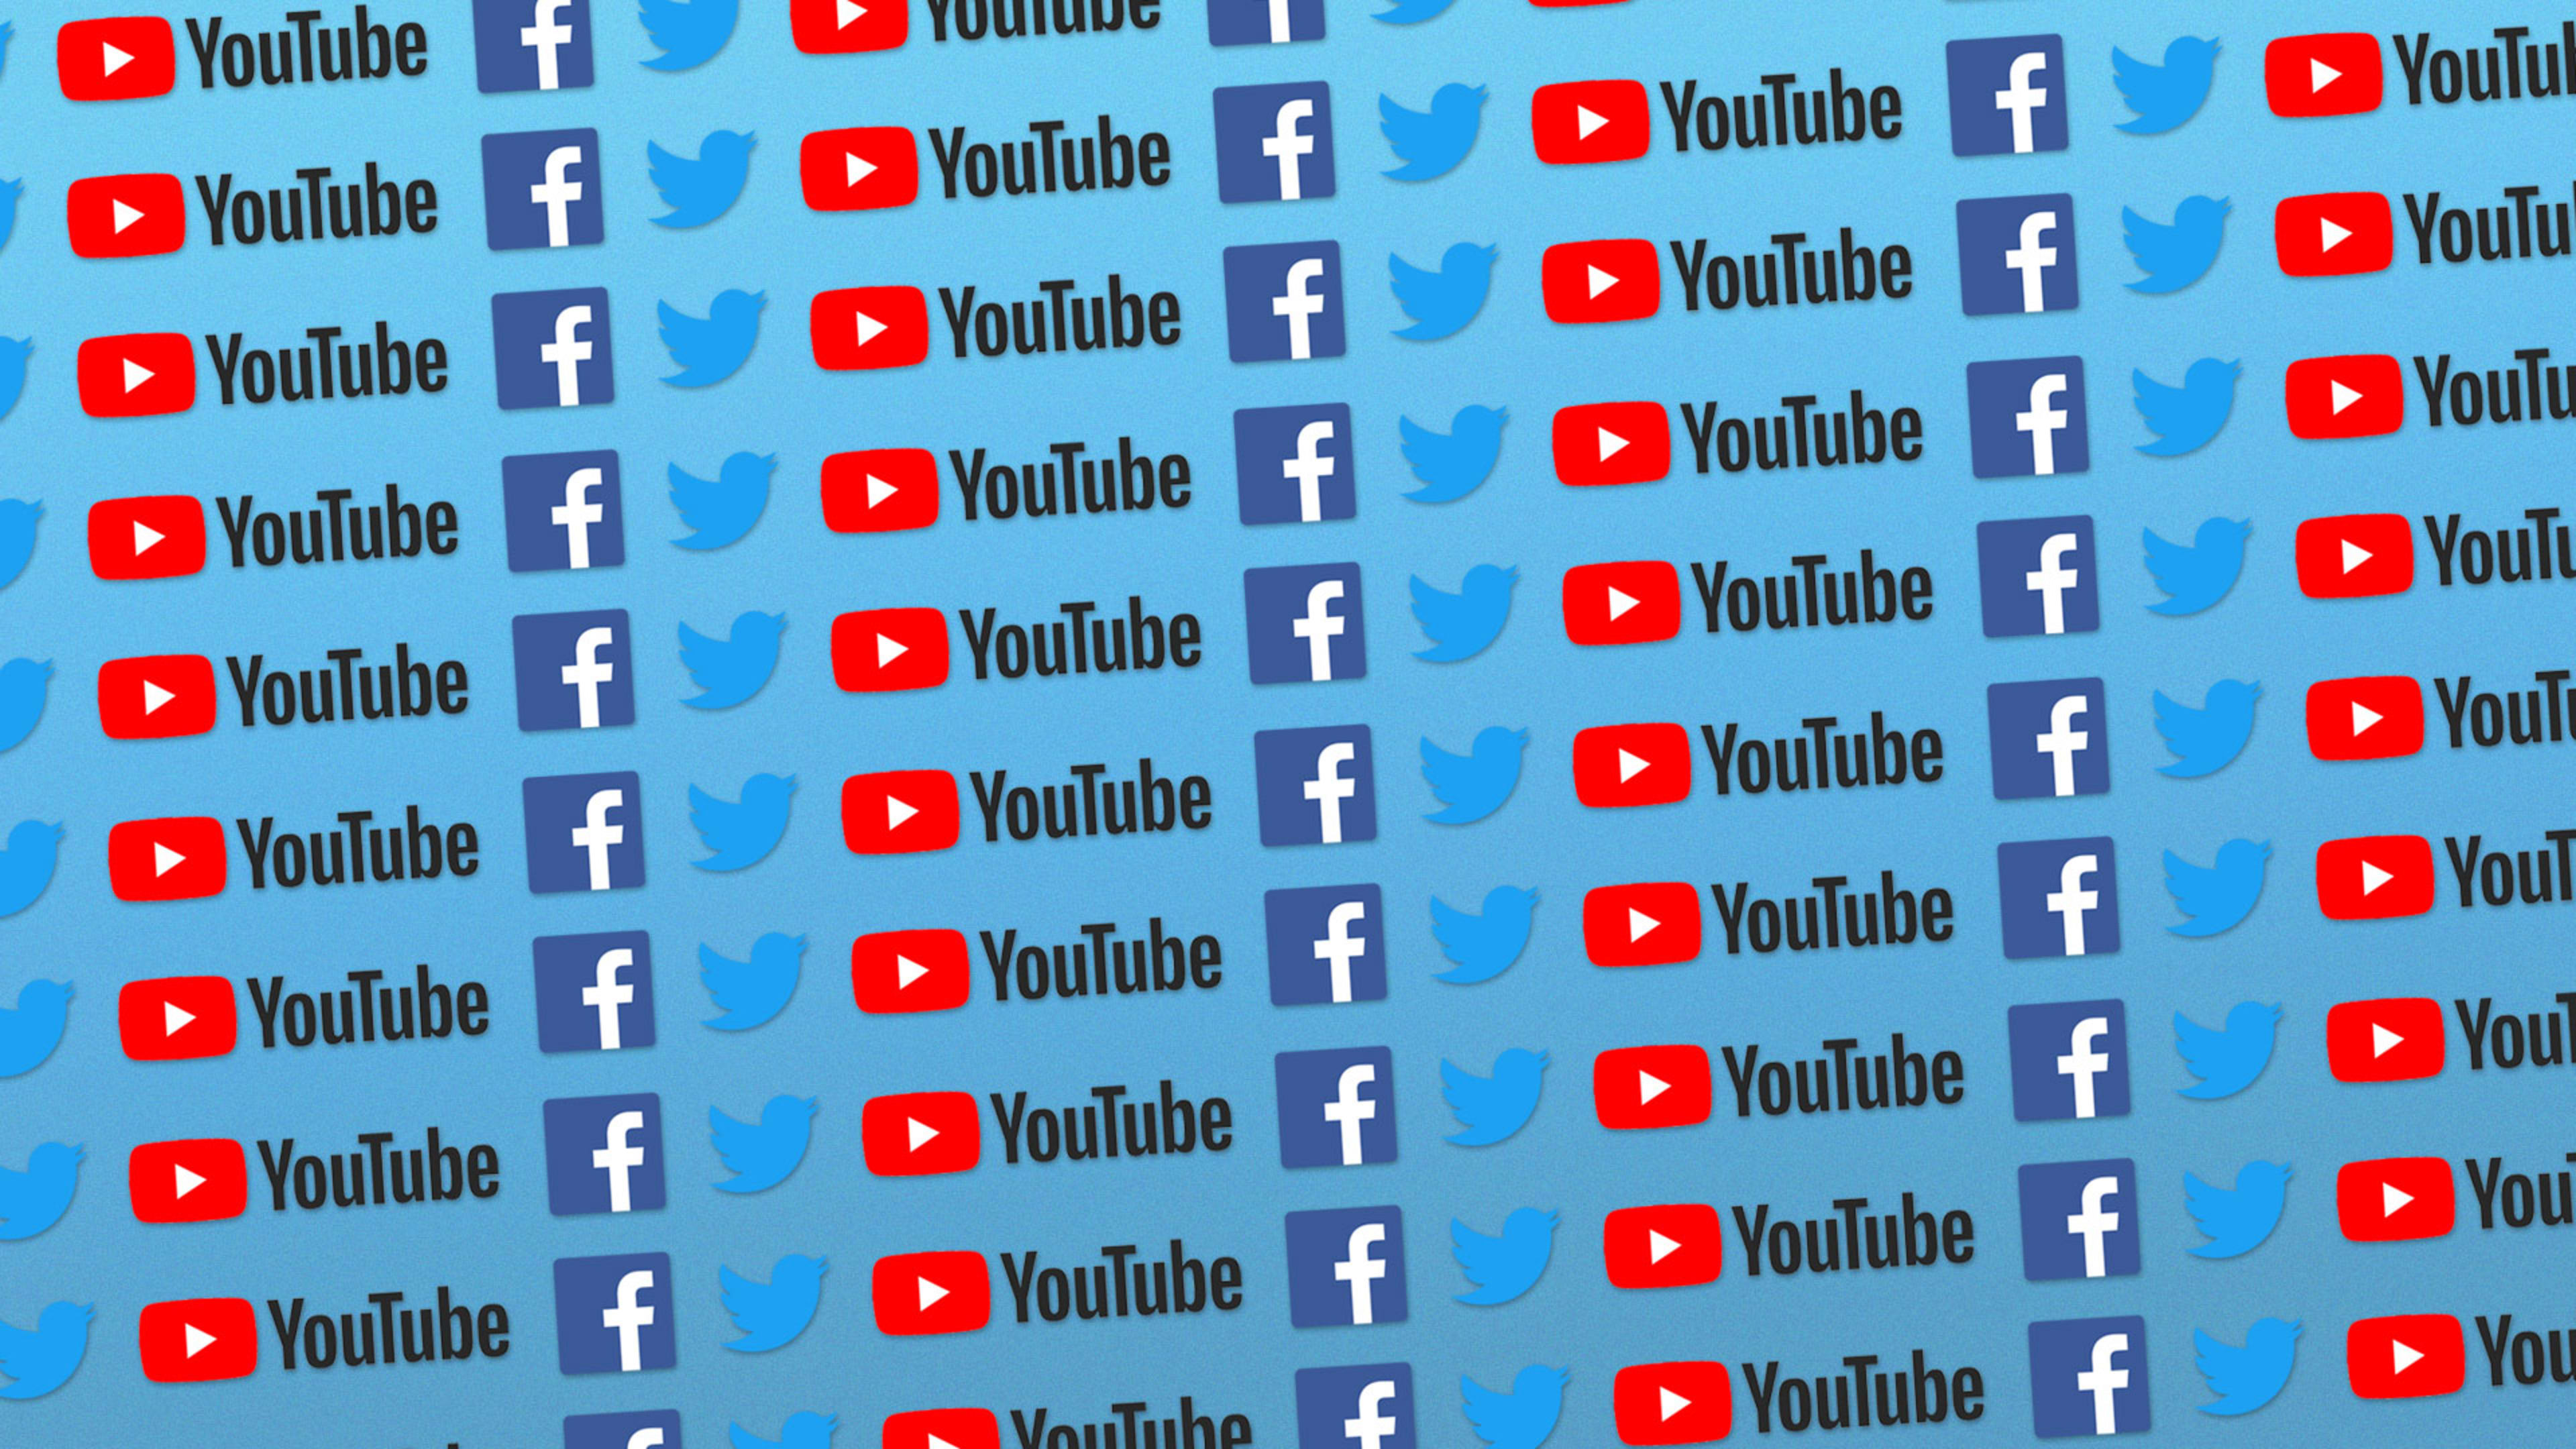 How To Use Facebook, Twitter, And YouTube To Change Your Career